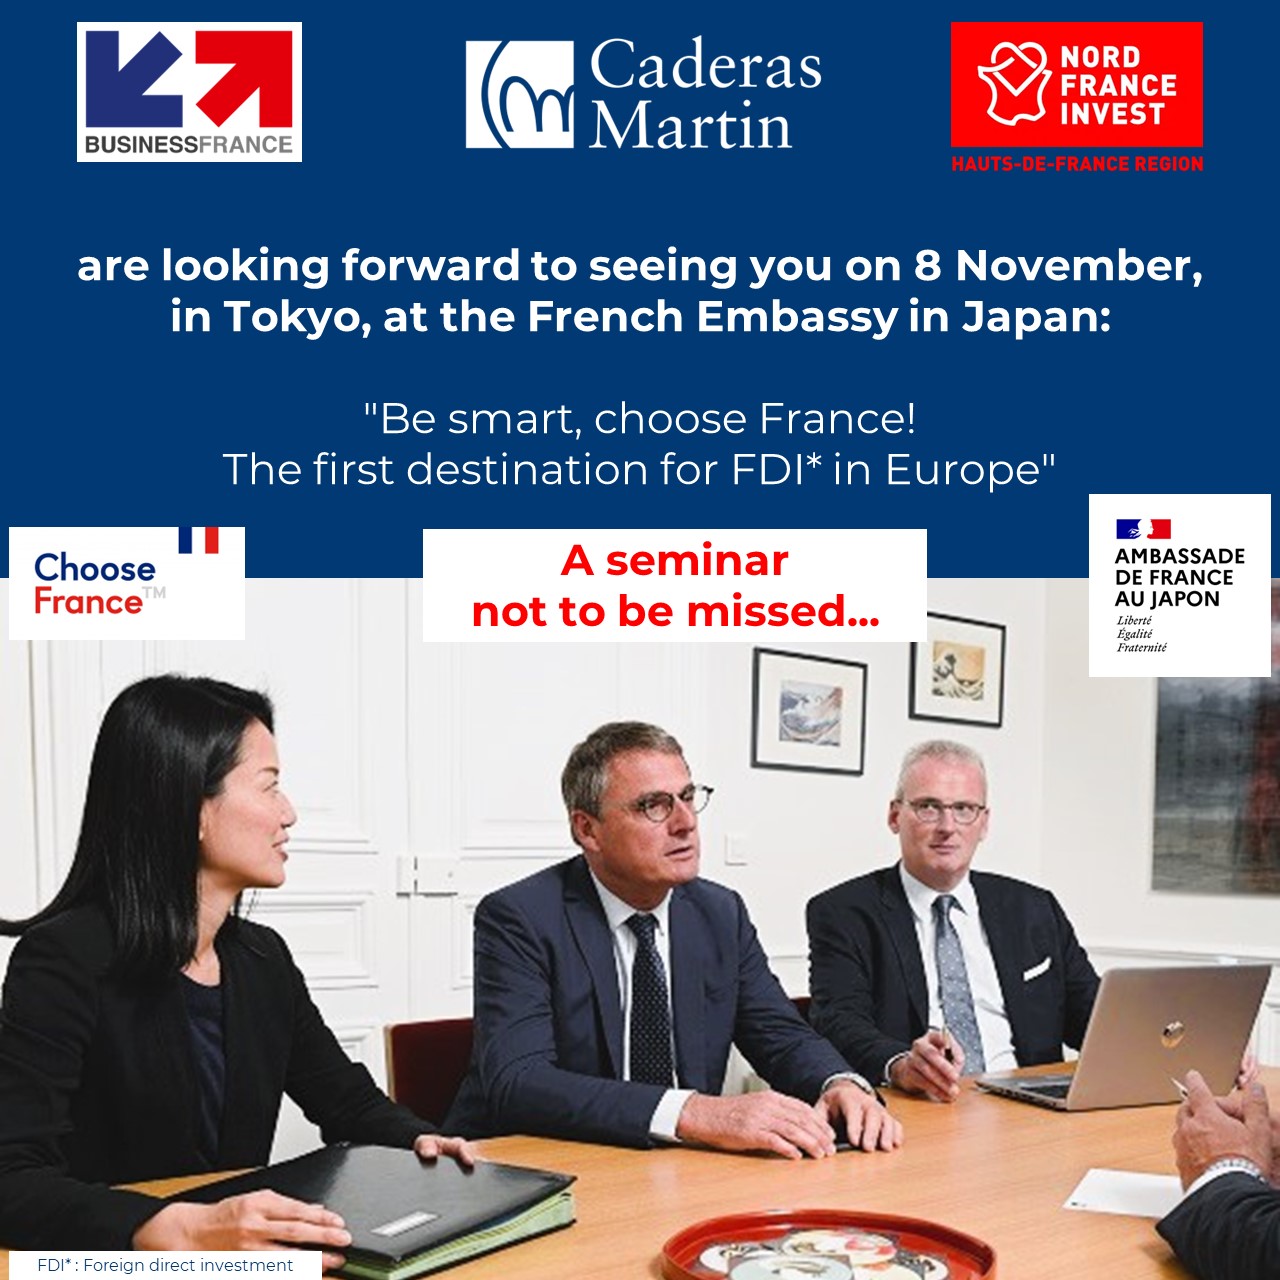 Caderas Martin is organising a seminar in Tokyo in collaboration with Business France and Nord France Invest